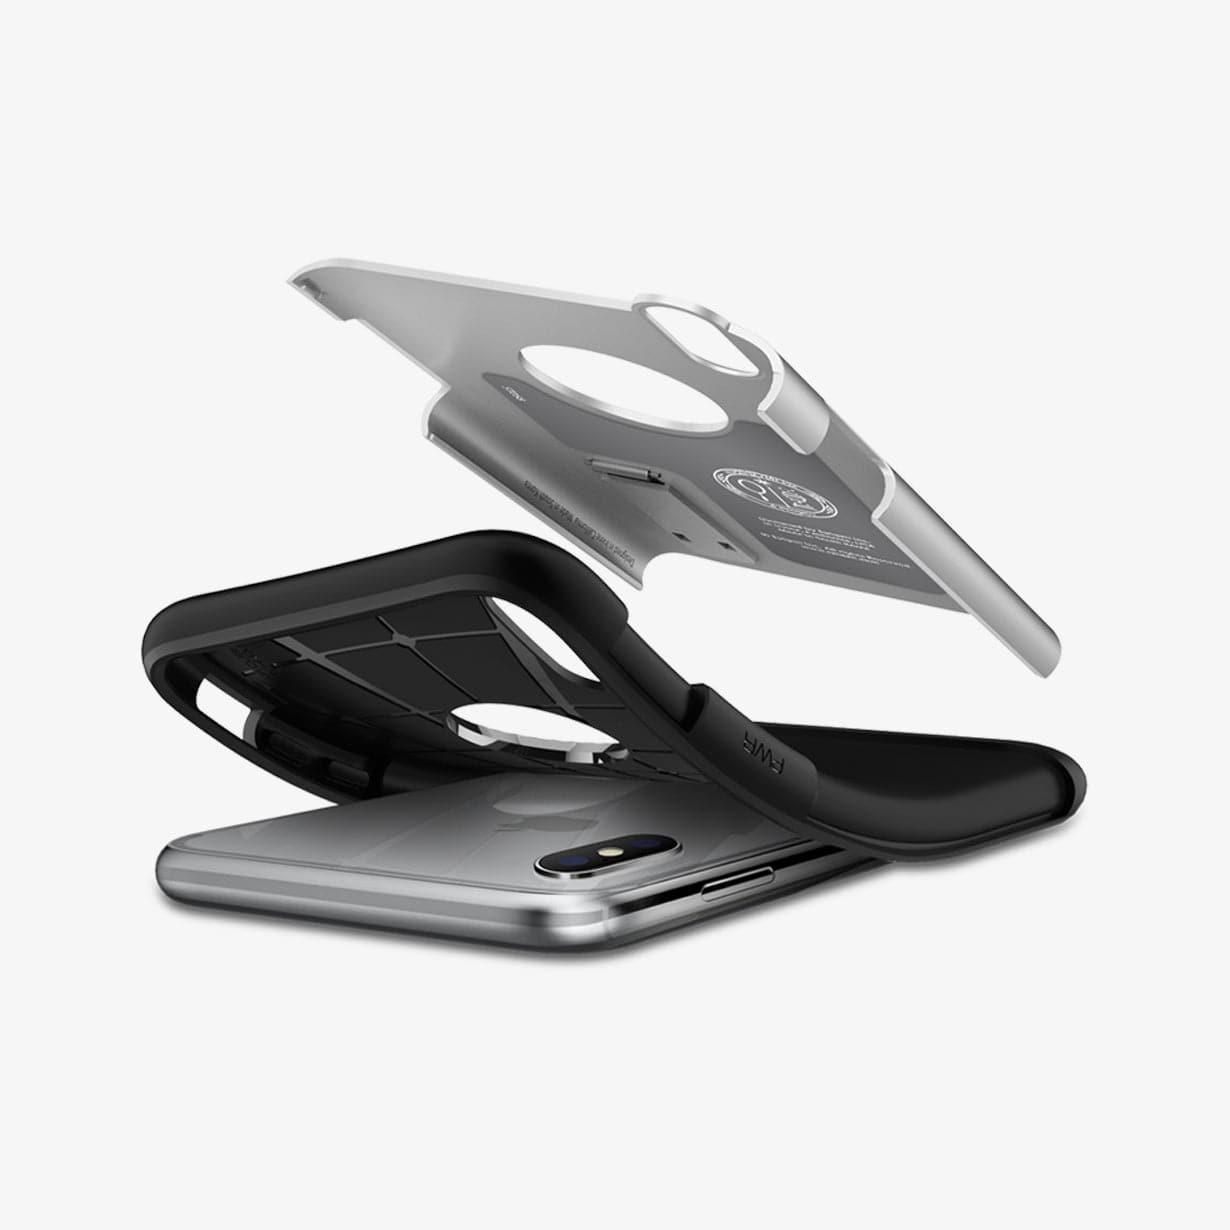 063CS24521 - iPhone XS / X Case Slim Armor in satin silver showing the case bending away from device and hard pc hovering above